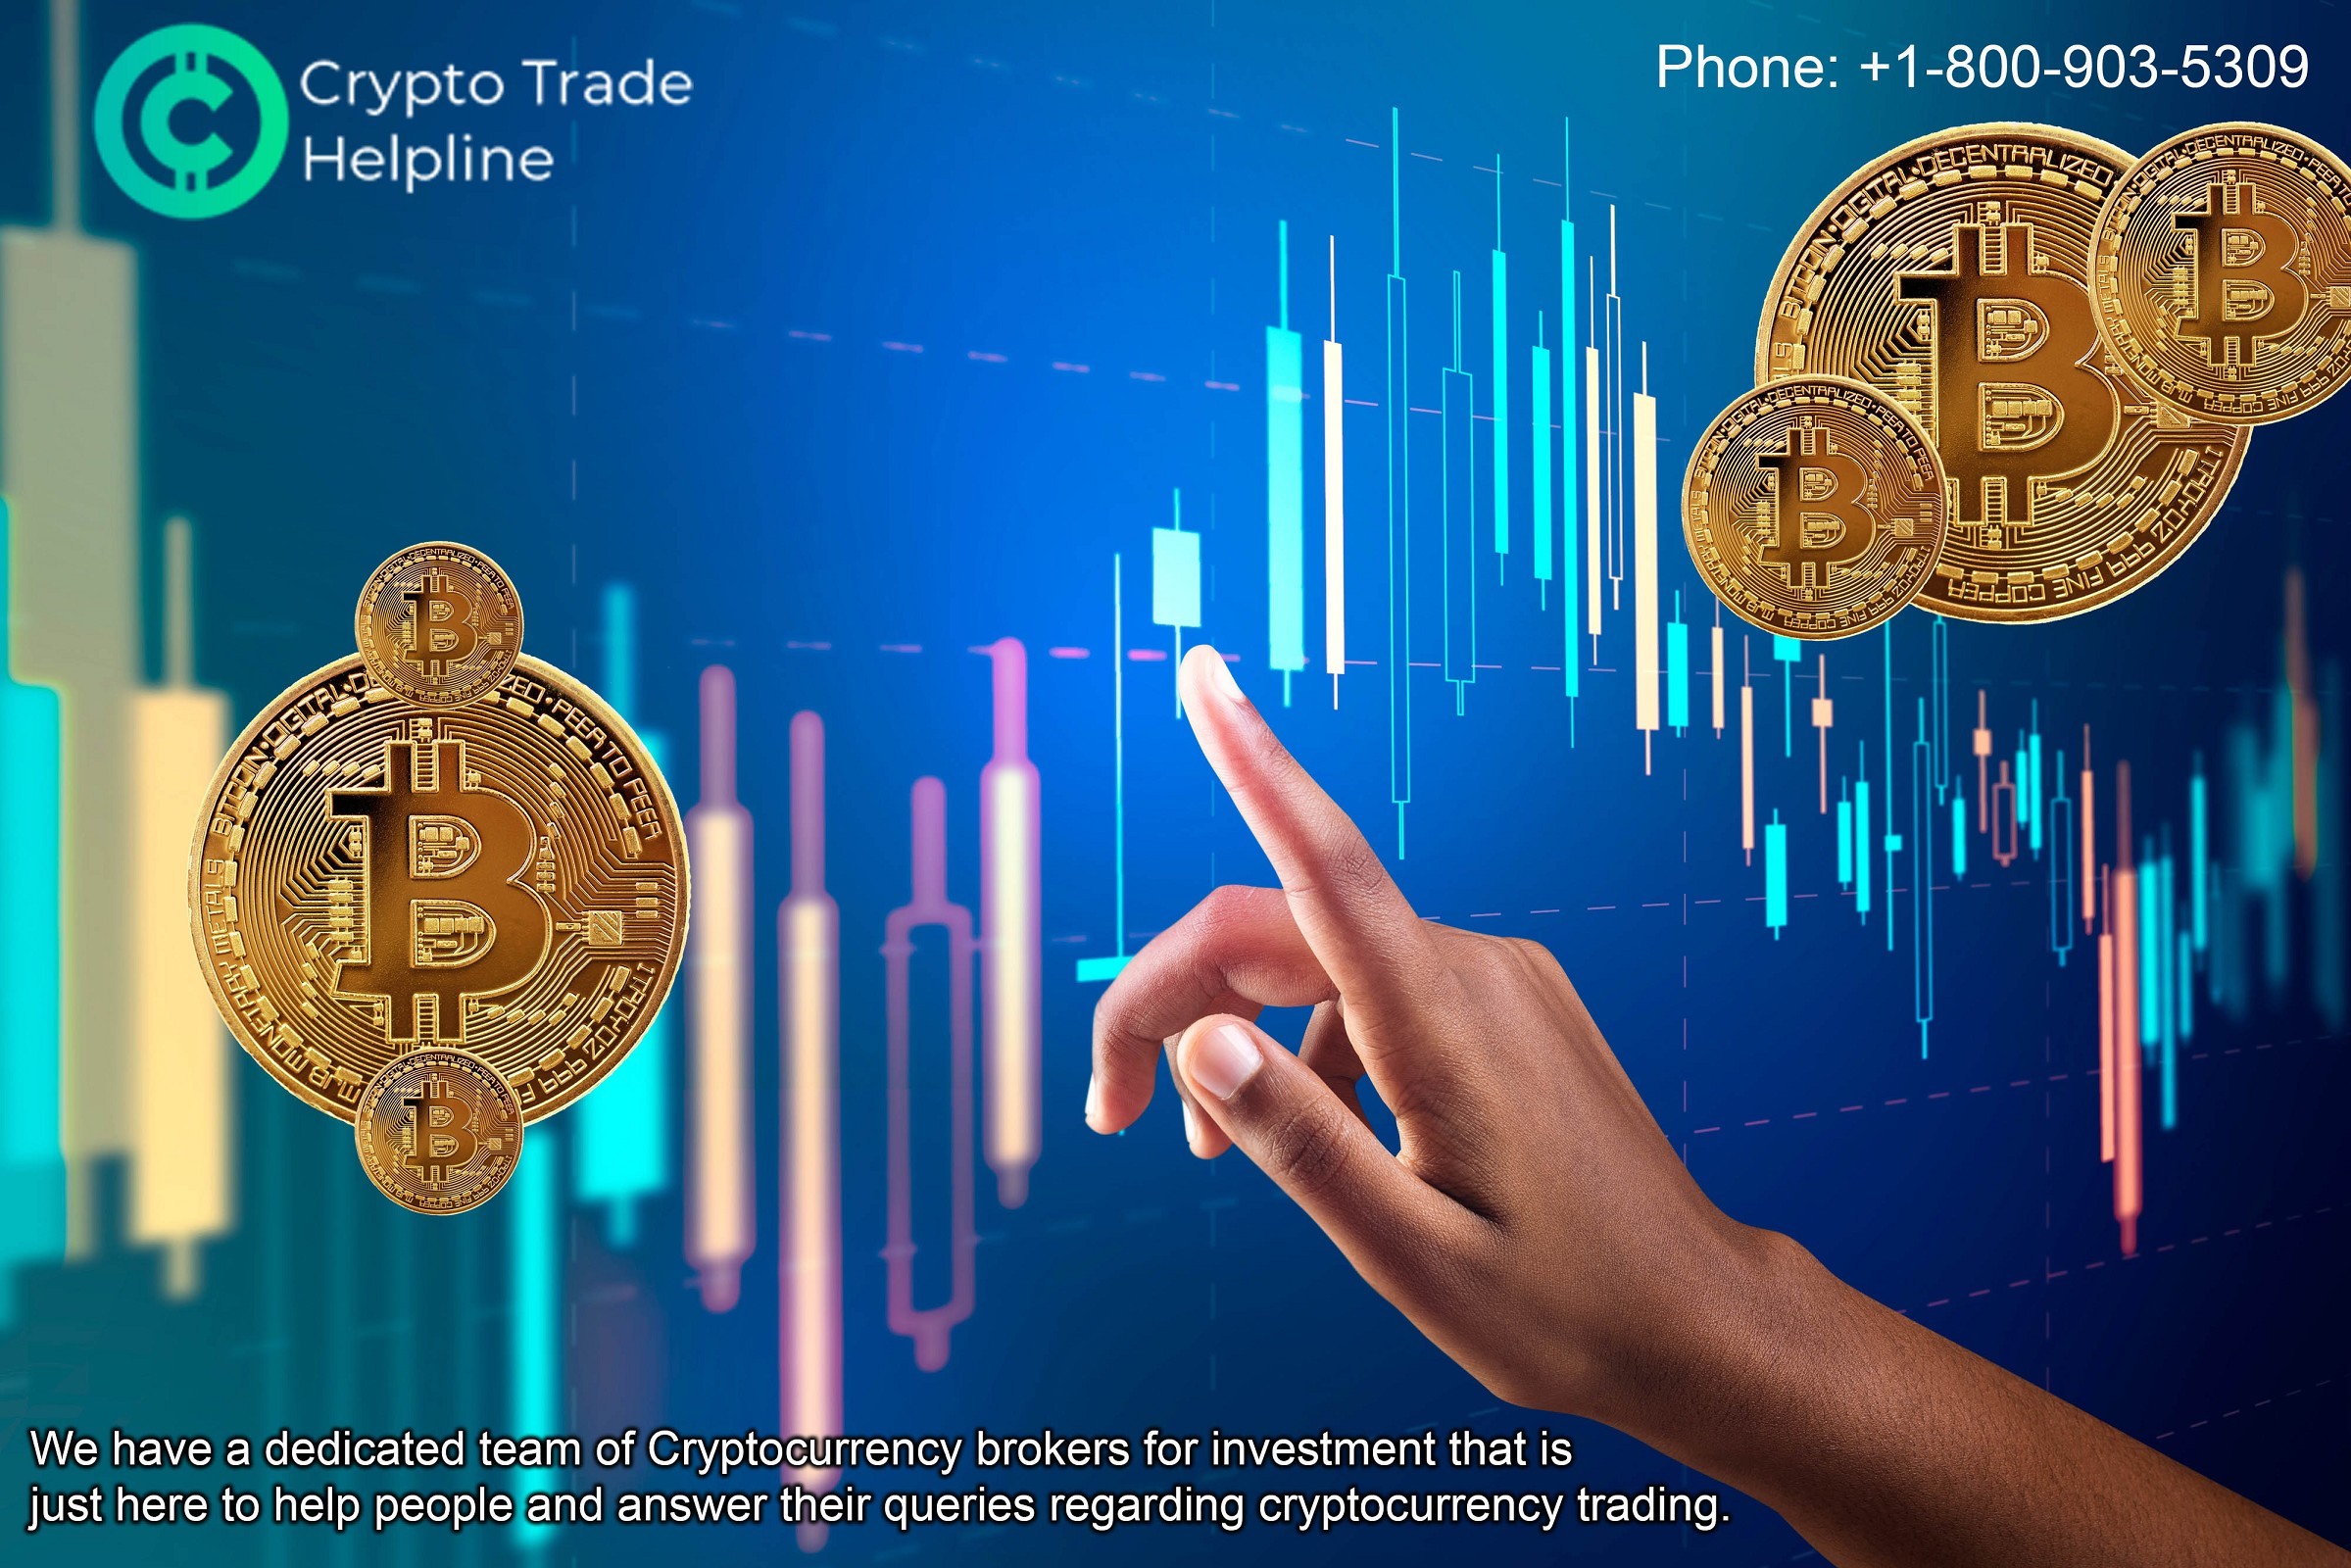 Benefits of Blockchain Technology - cryptocurrency trading helpline experts